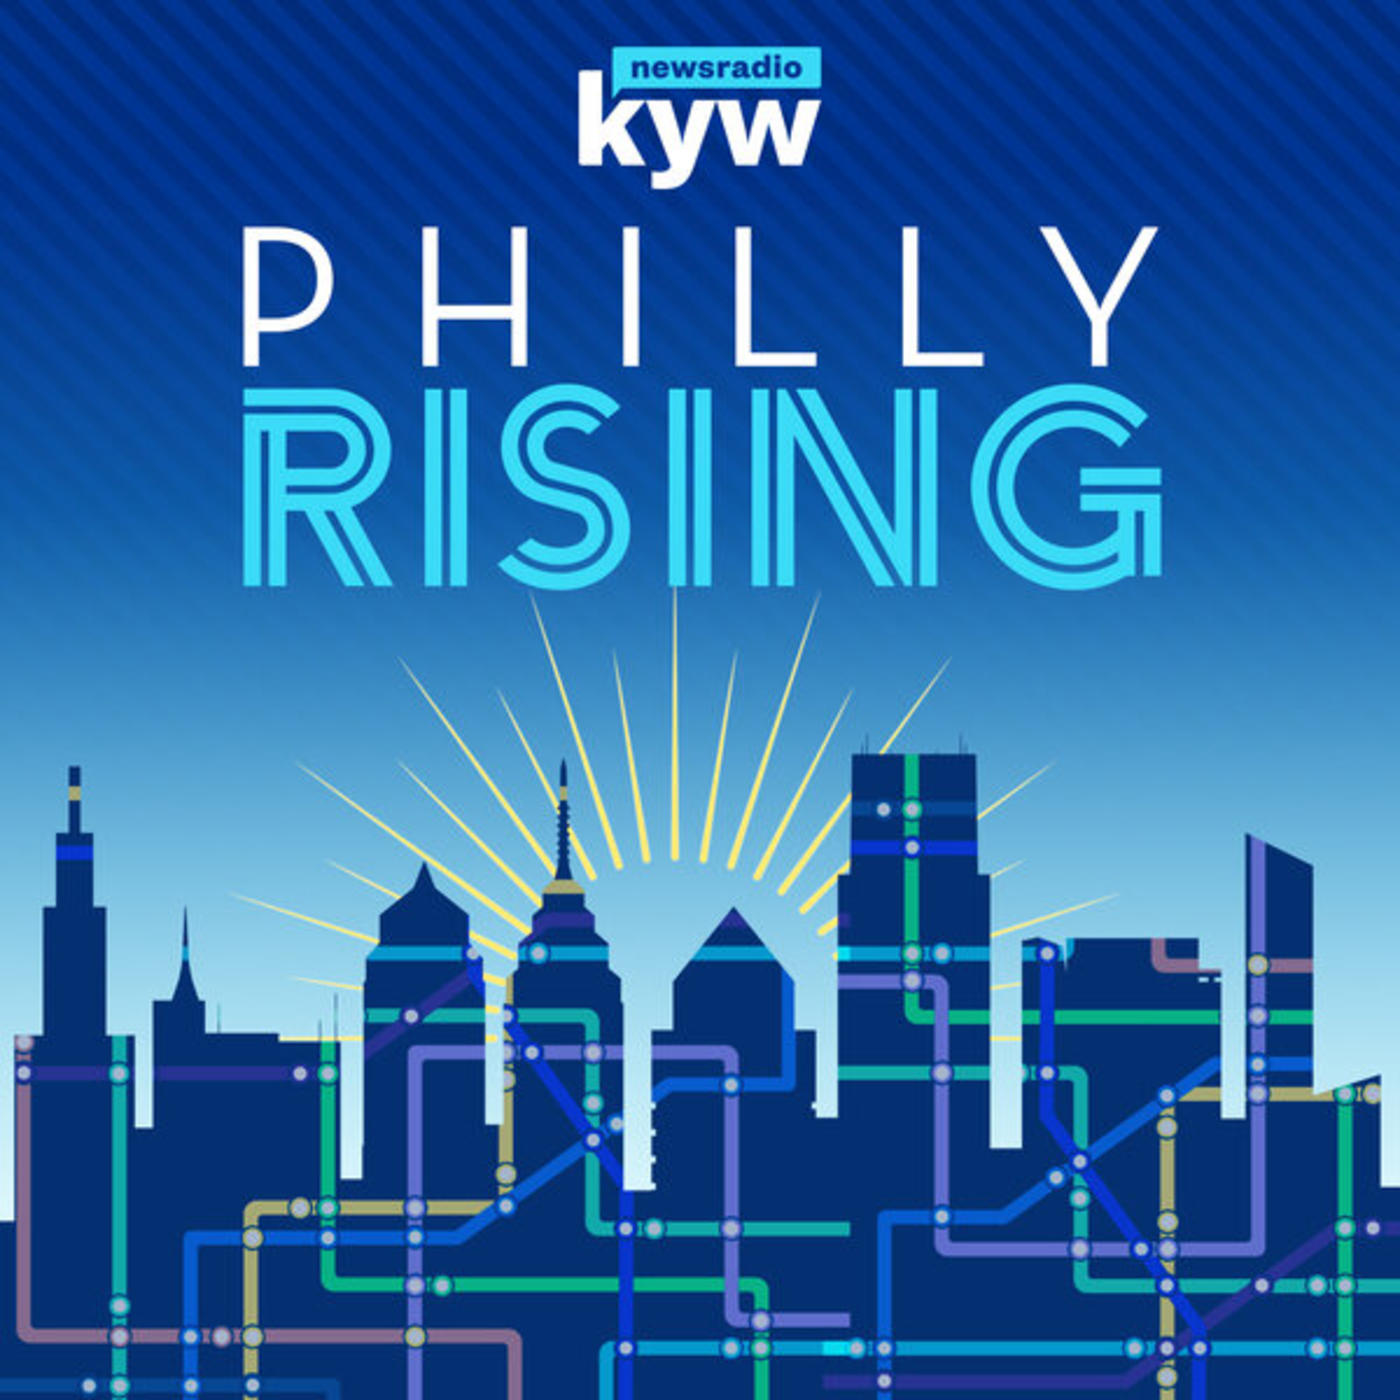 Philly Rising : Bringing kids together through 'Work to Ride'